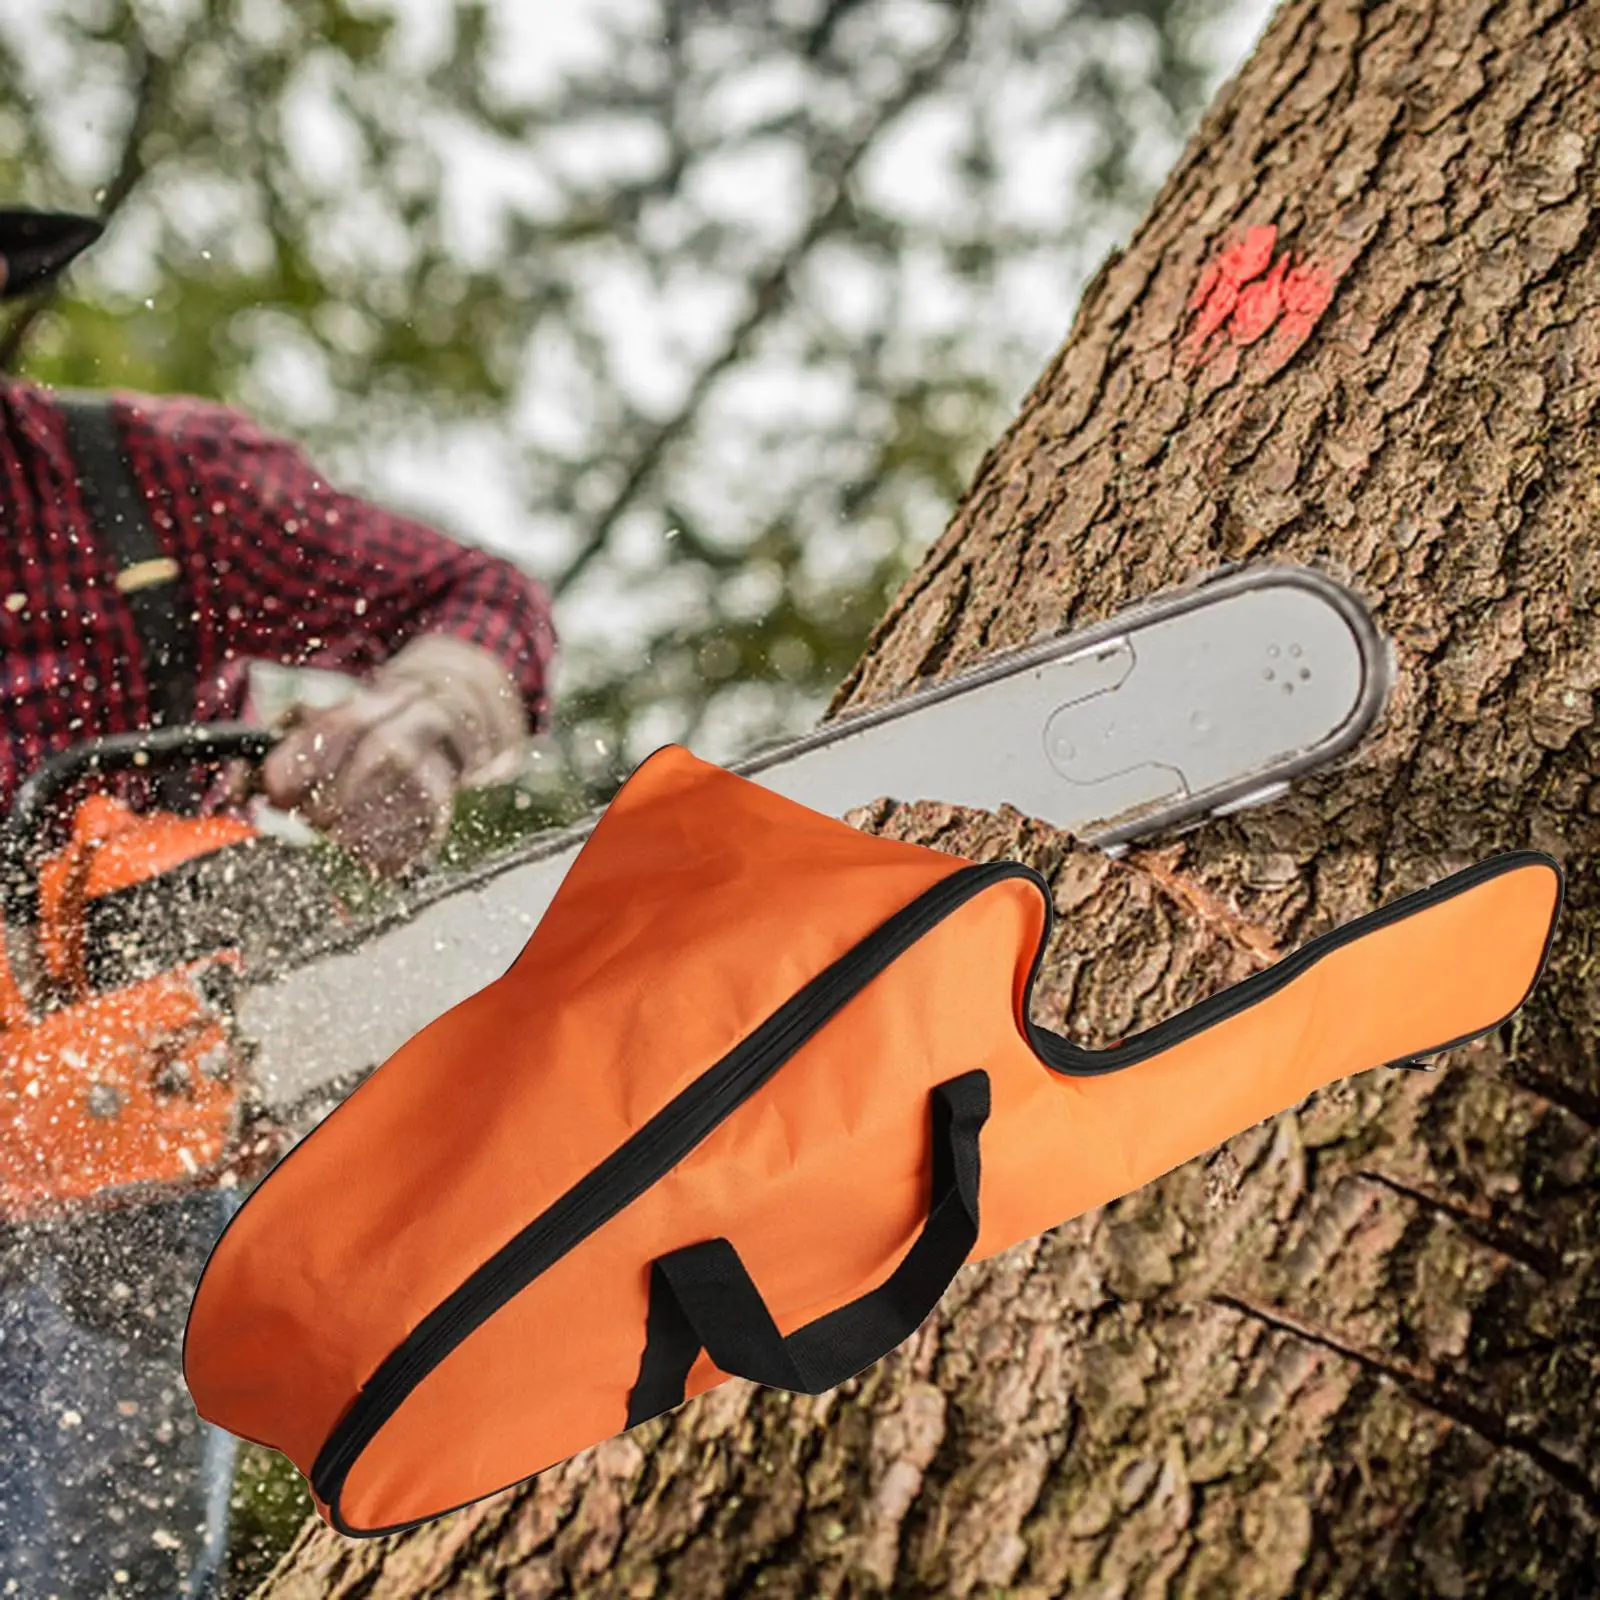 Portable Chainsaw Storage Bag,Full Protection Carrying Tools Bag,Waterproof Protective Storage Bags